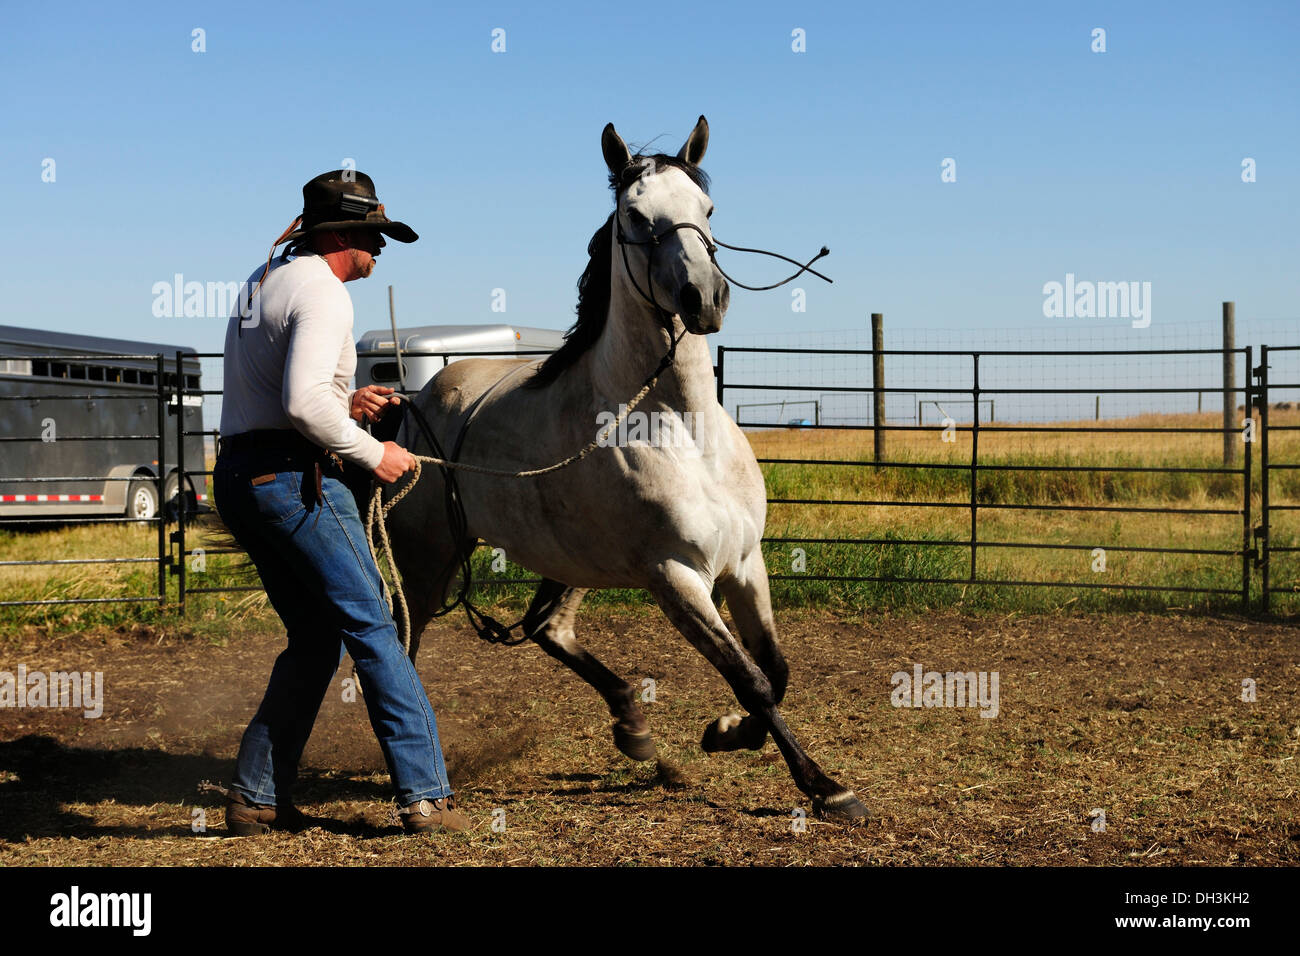 Bucking horse being heldby the reins by a cowboy in a paddock on the prairie, Saskatchewan Province, Canada Stock Photo